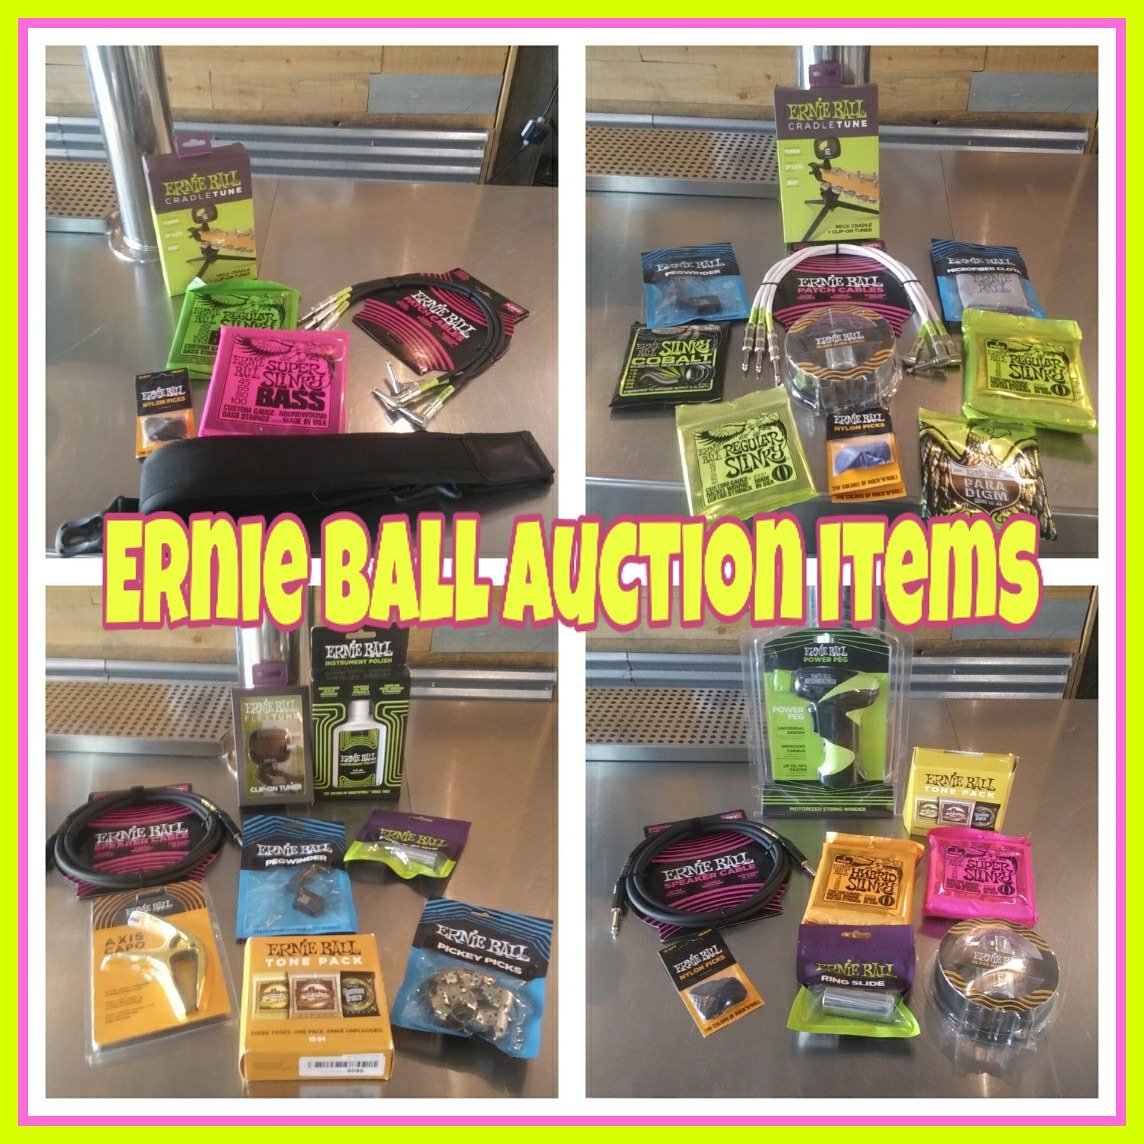 Thank you Adam Gainey and Erbie Ball for donating these items to our Oktoberfest Acoustic Silent Auction. All proceeds for the Desert Autism Foundation via @joshheinzoninsta and @concertforautism